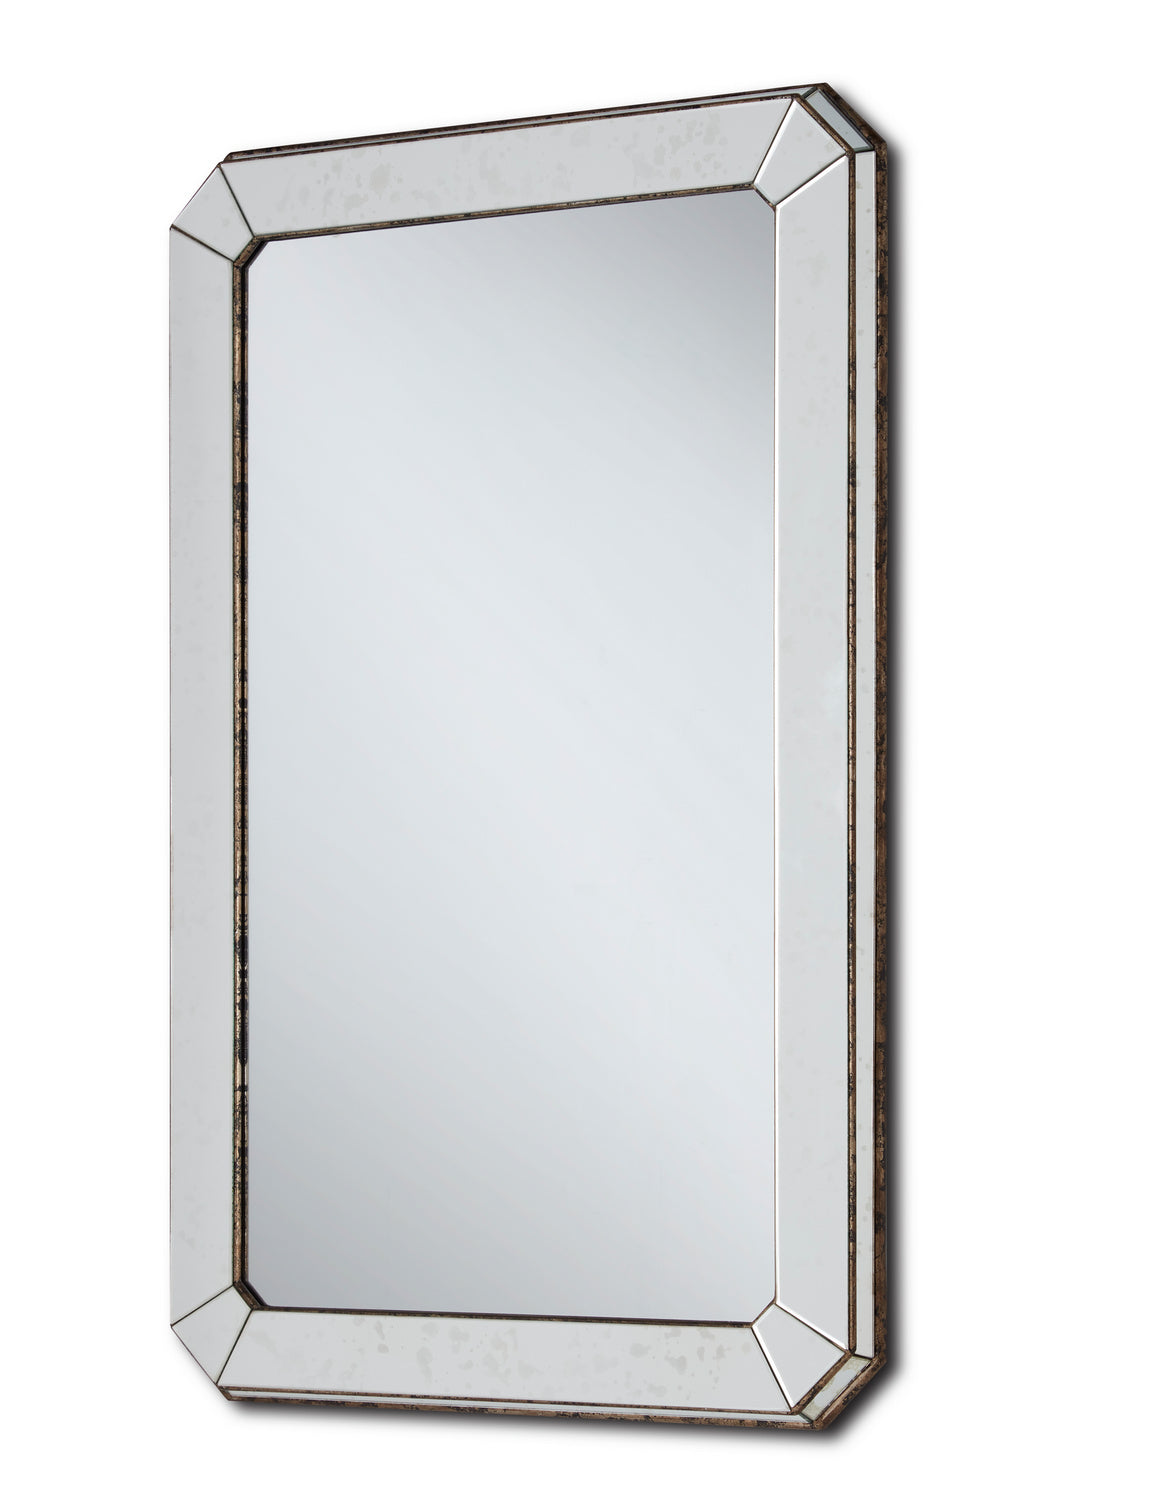 Mirror from the Antiqued collection in Antique Mirror finish